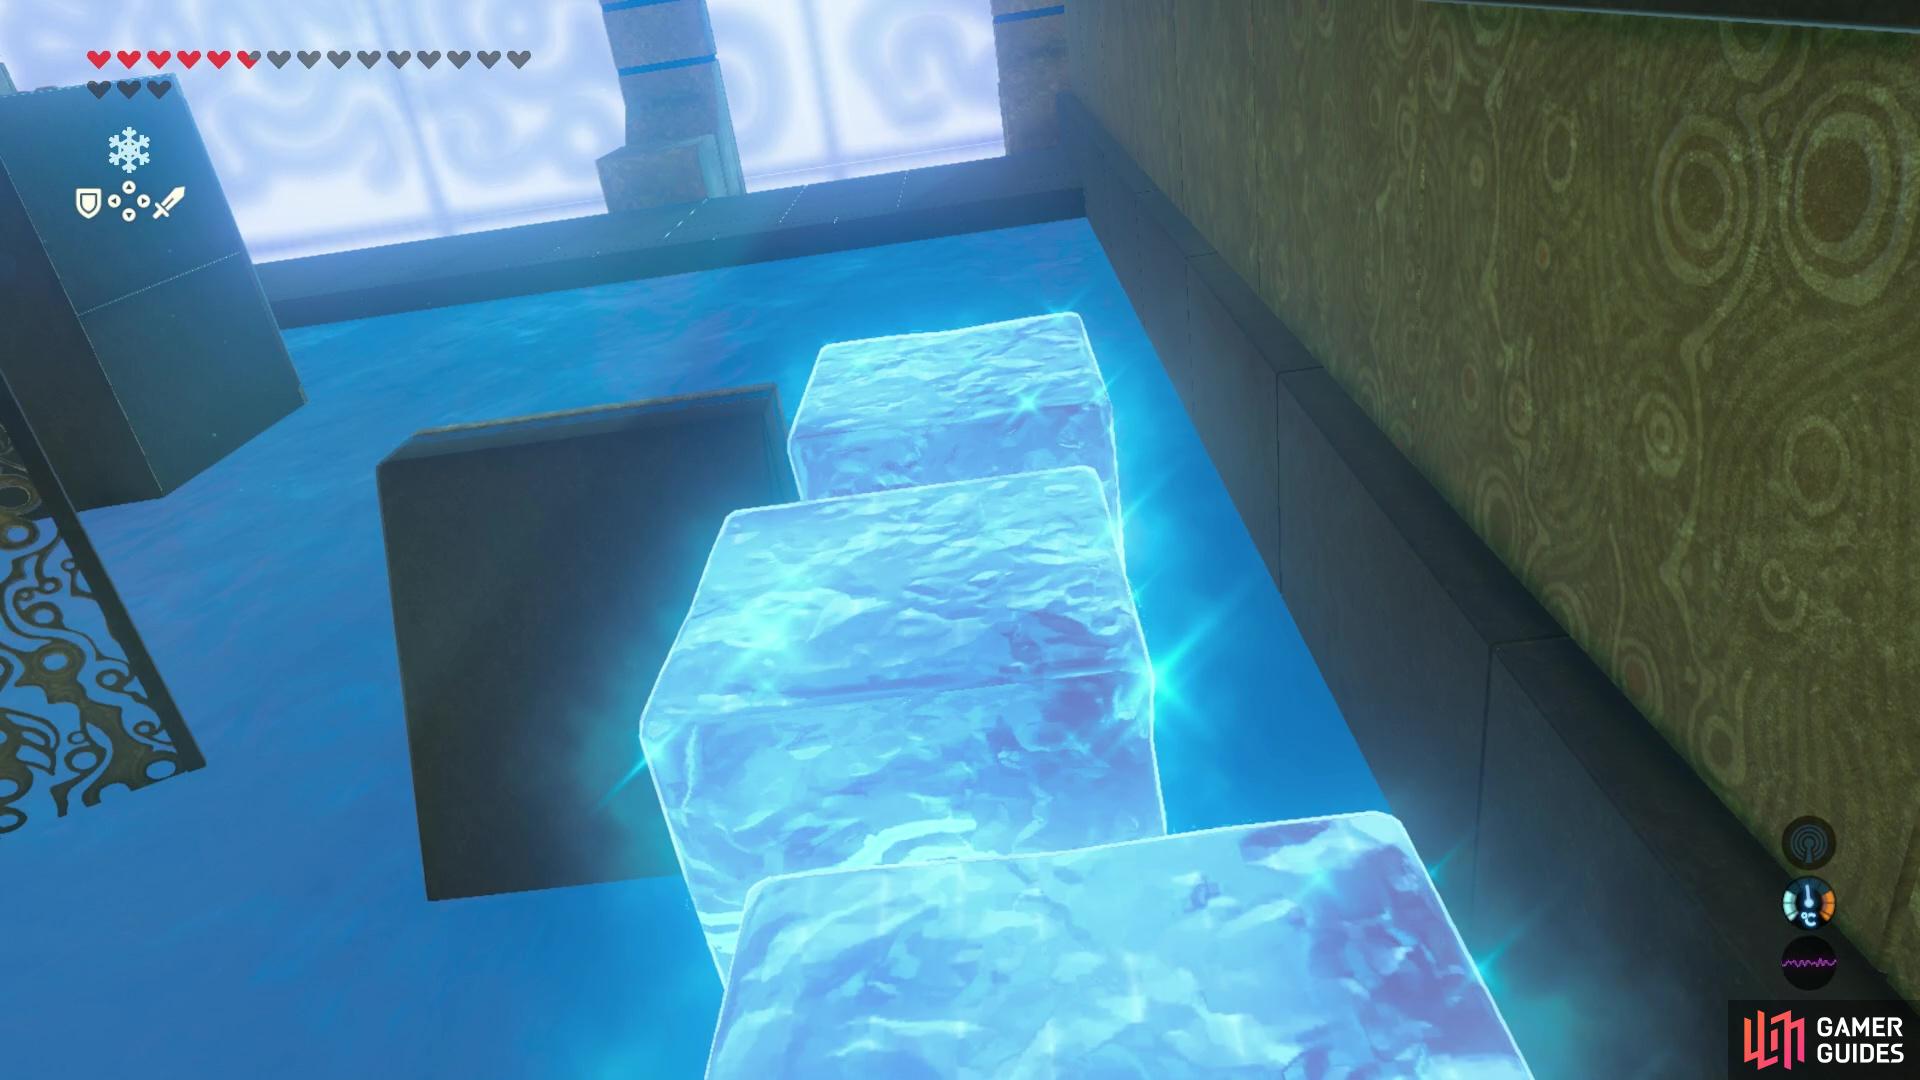 Make an icy stair way up to the treasure chest